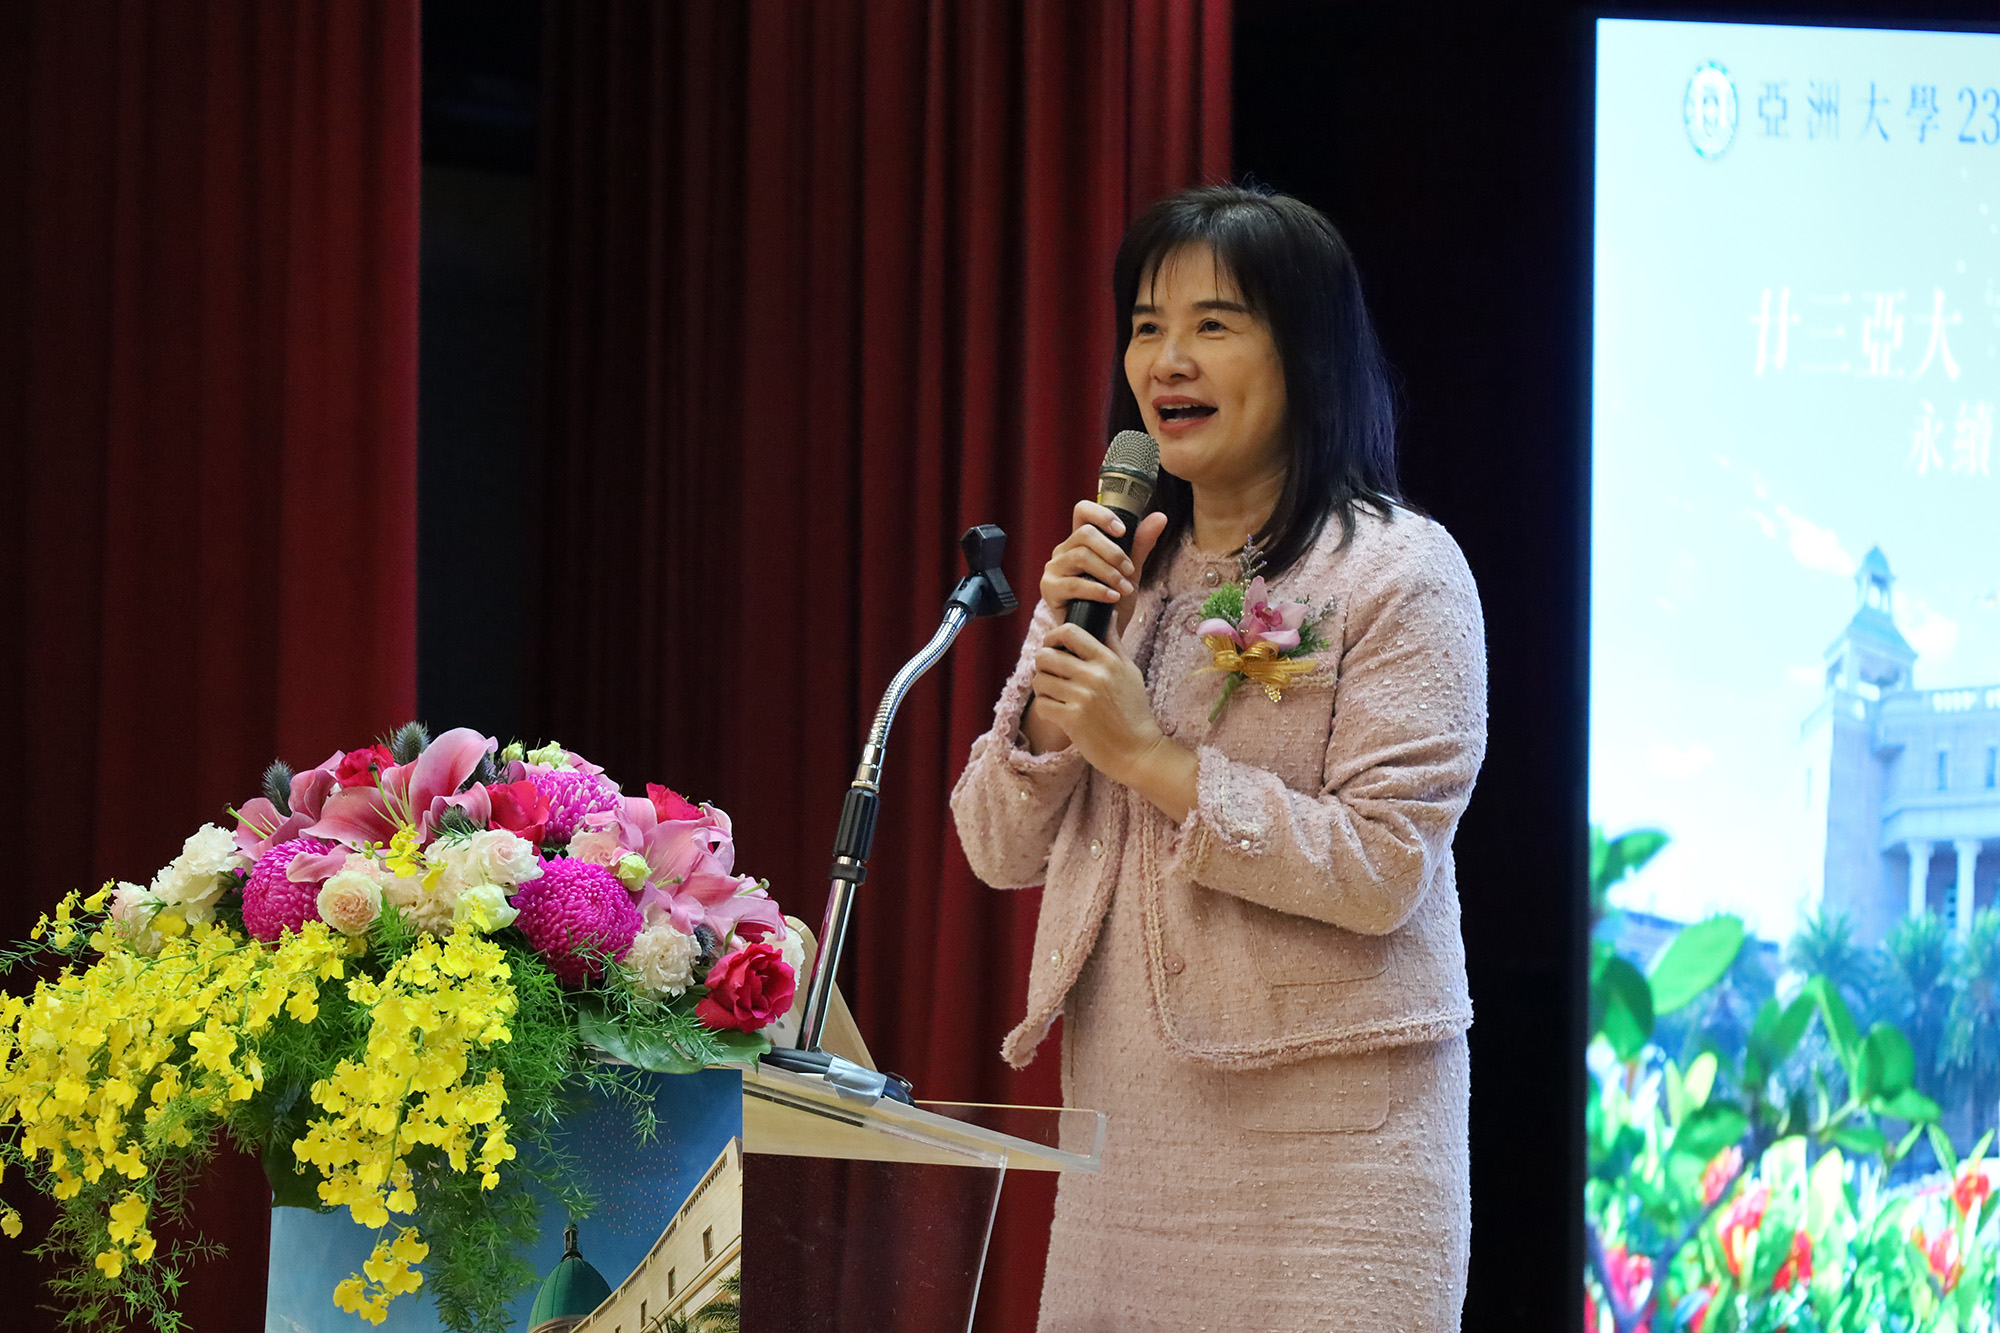 Principal Hsiang-Yun Chen of National Changhua Girls' Senior High School expressed her eagerness to actively recommend outstanding high school students to attend Asia University